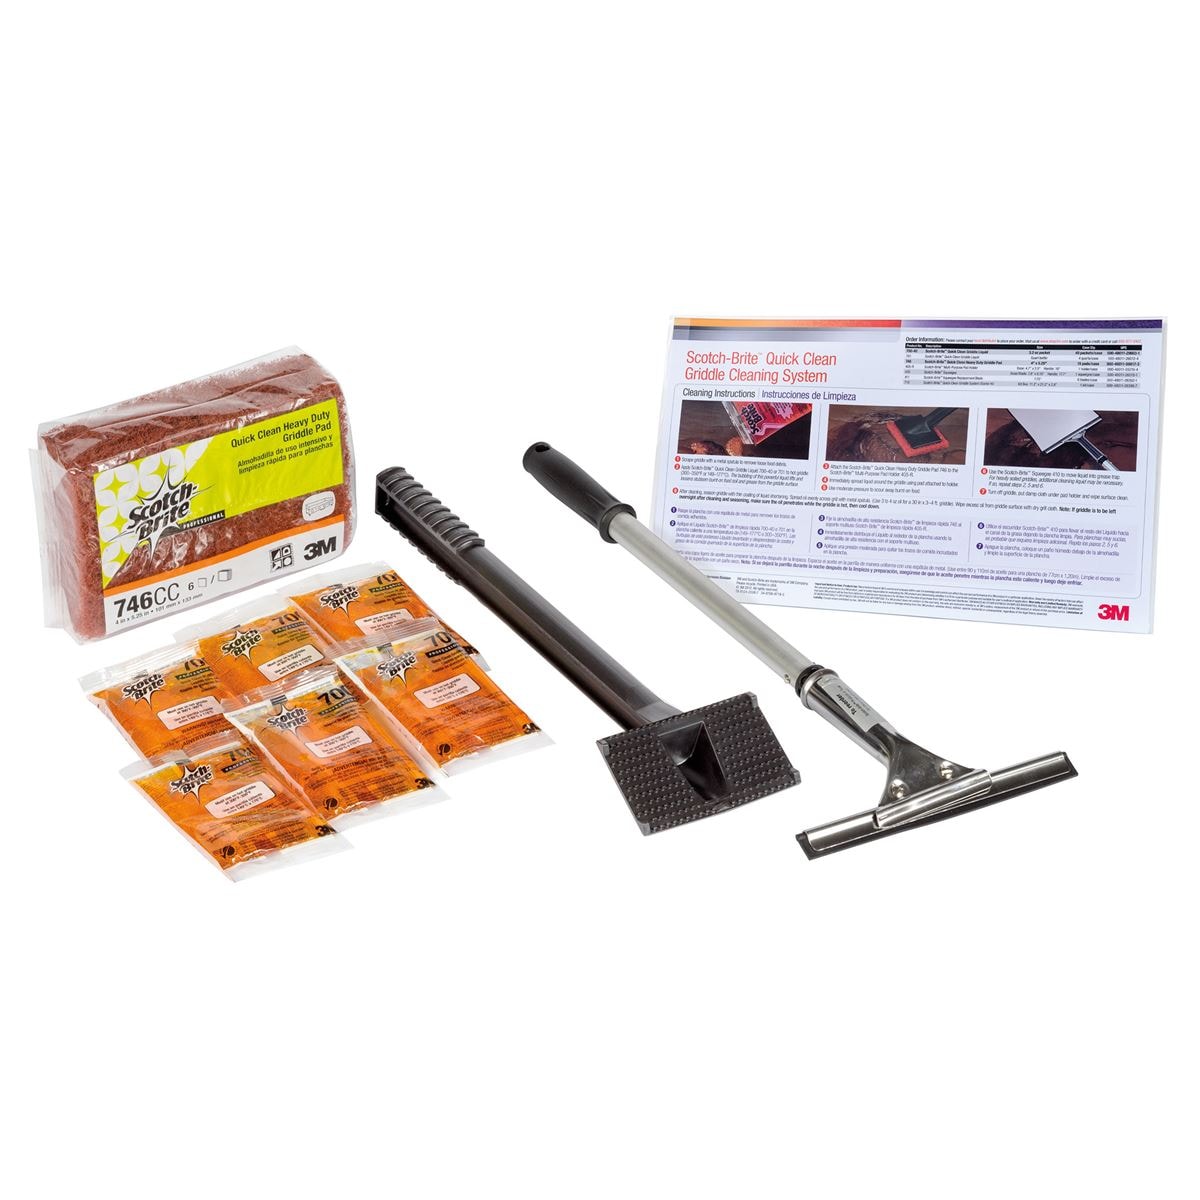 Wolf Accessories | Griddle Cleaning Kit 812278 Sub Zero Wolf Stainless Steel Cleaner And Polish